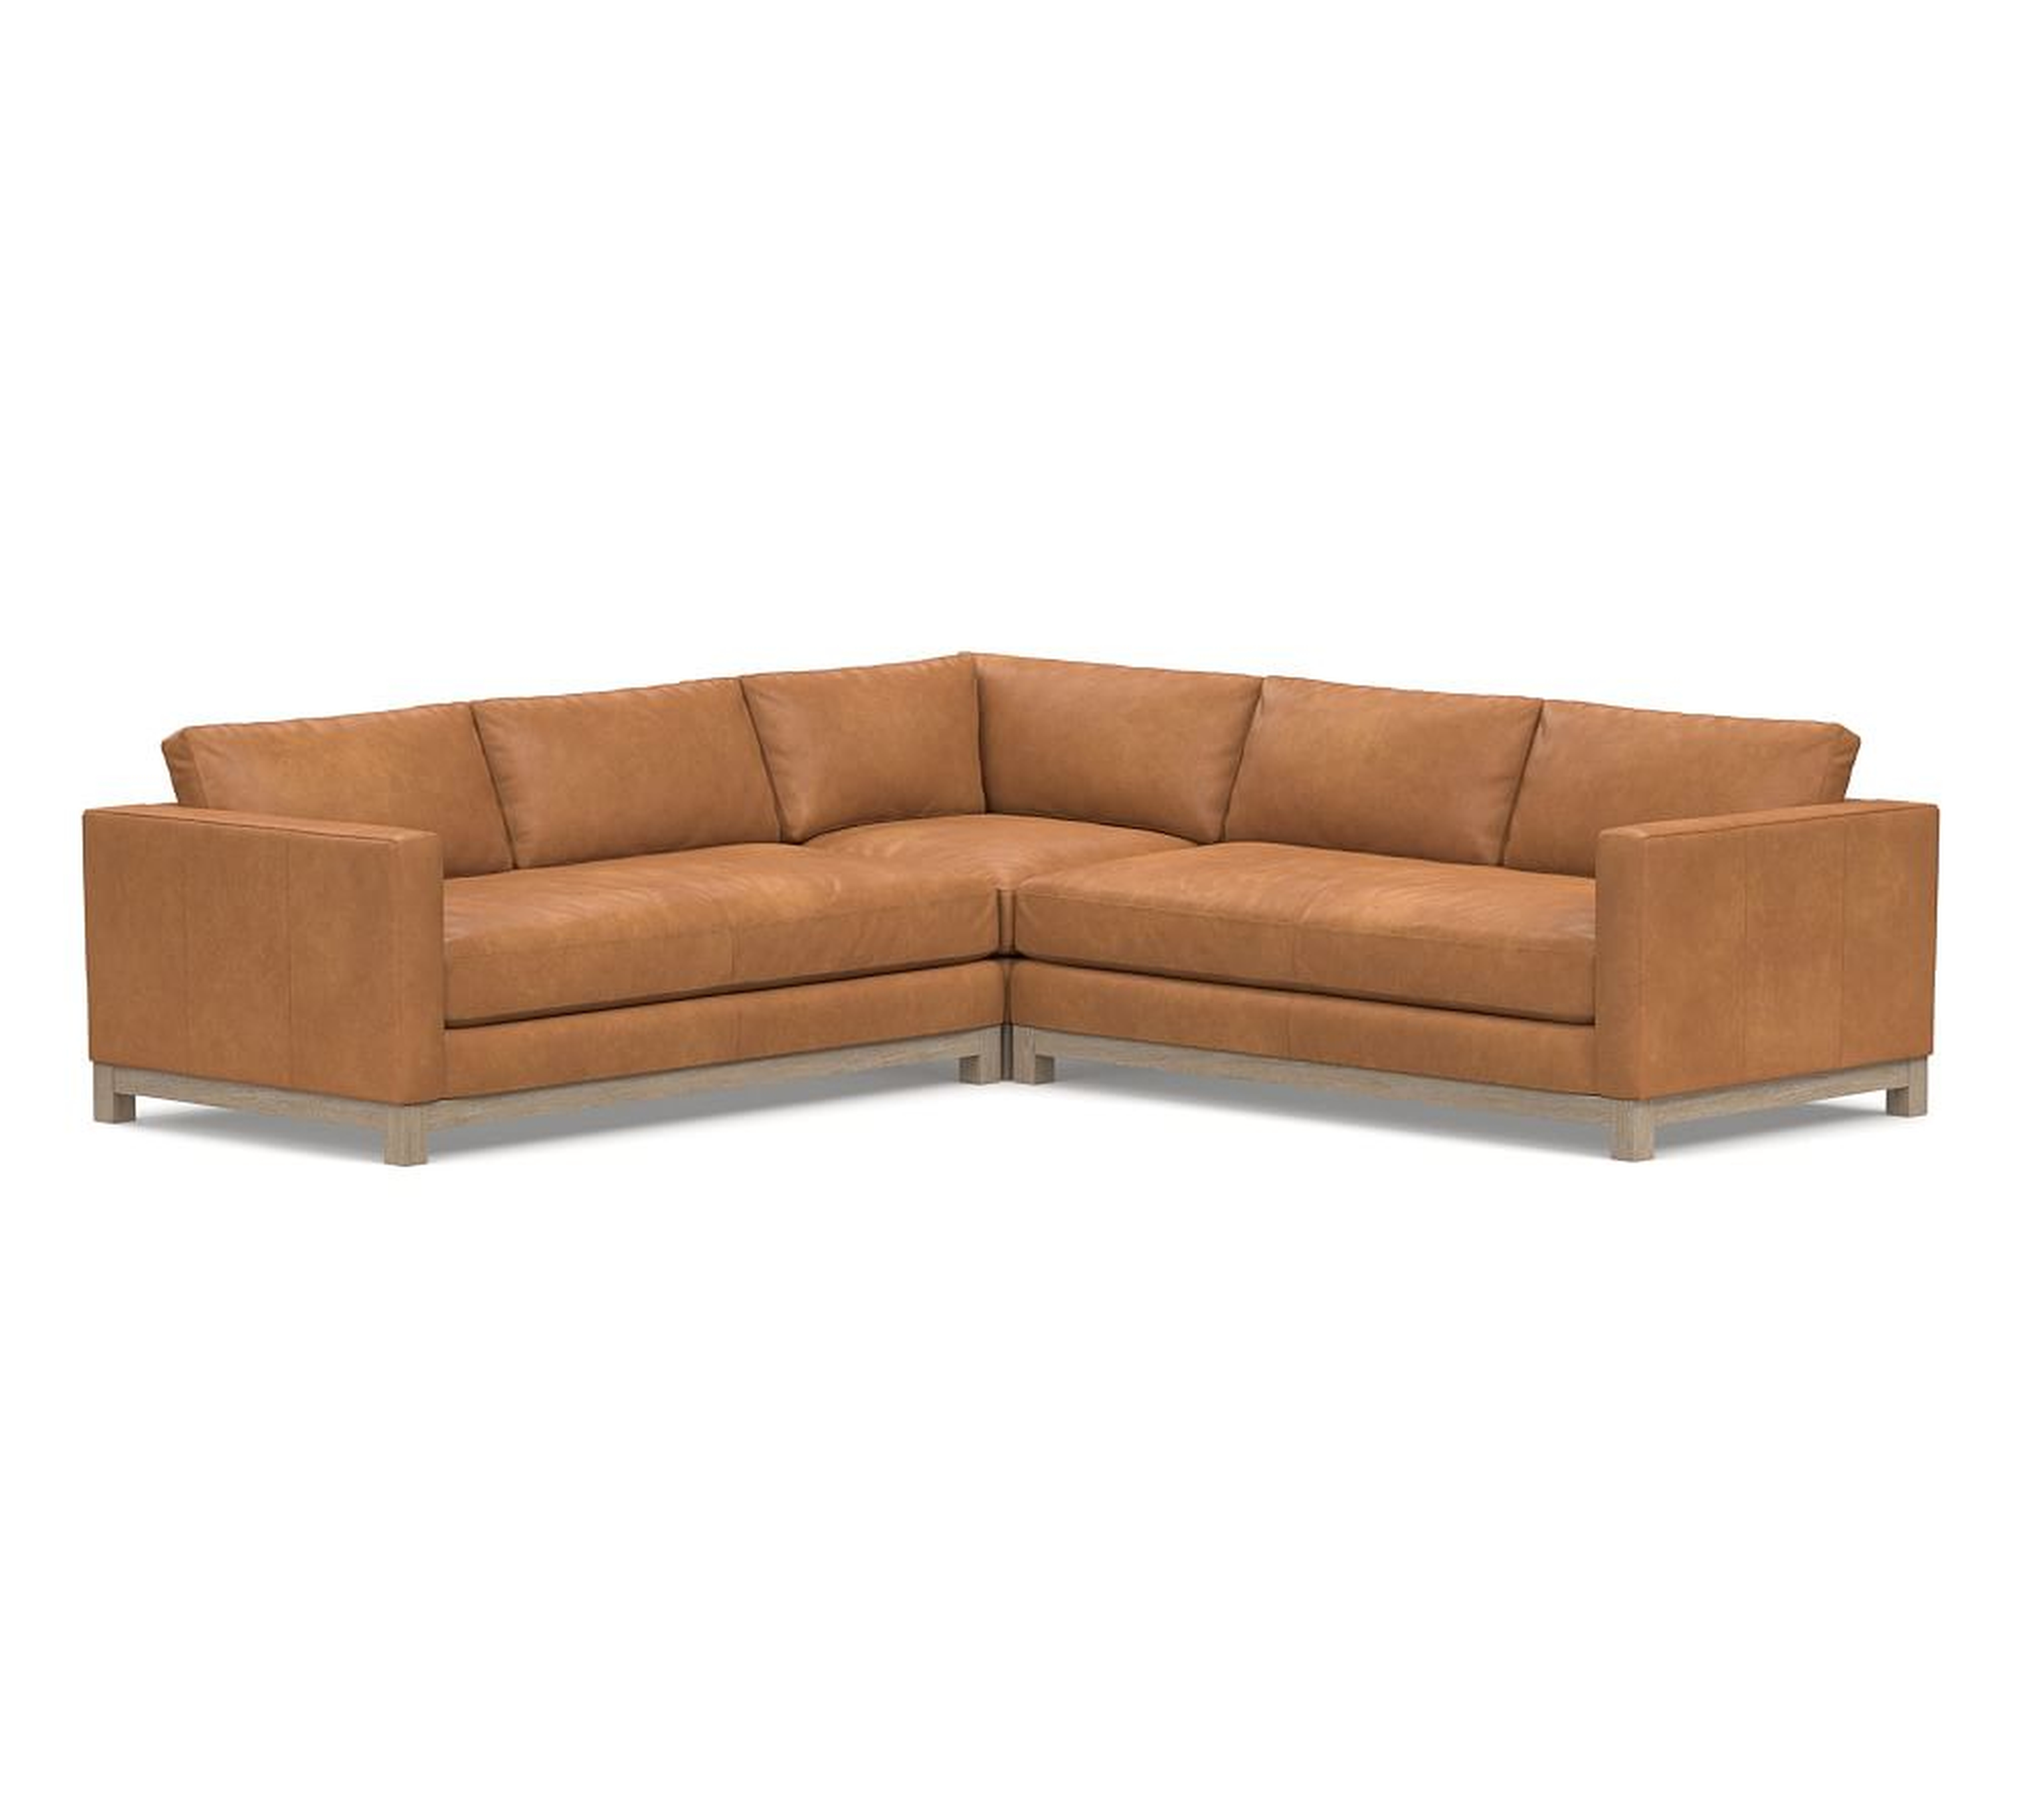 Jake Leather 3-Piece L-Shaped Corner Sectional with Wood Legs, Down Blend Wrapped Cushions Churchfield Camel - Pottery Barn